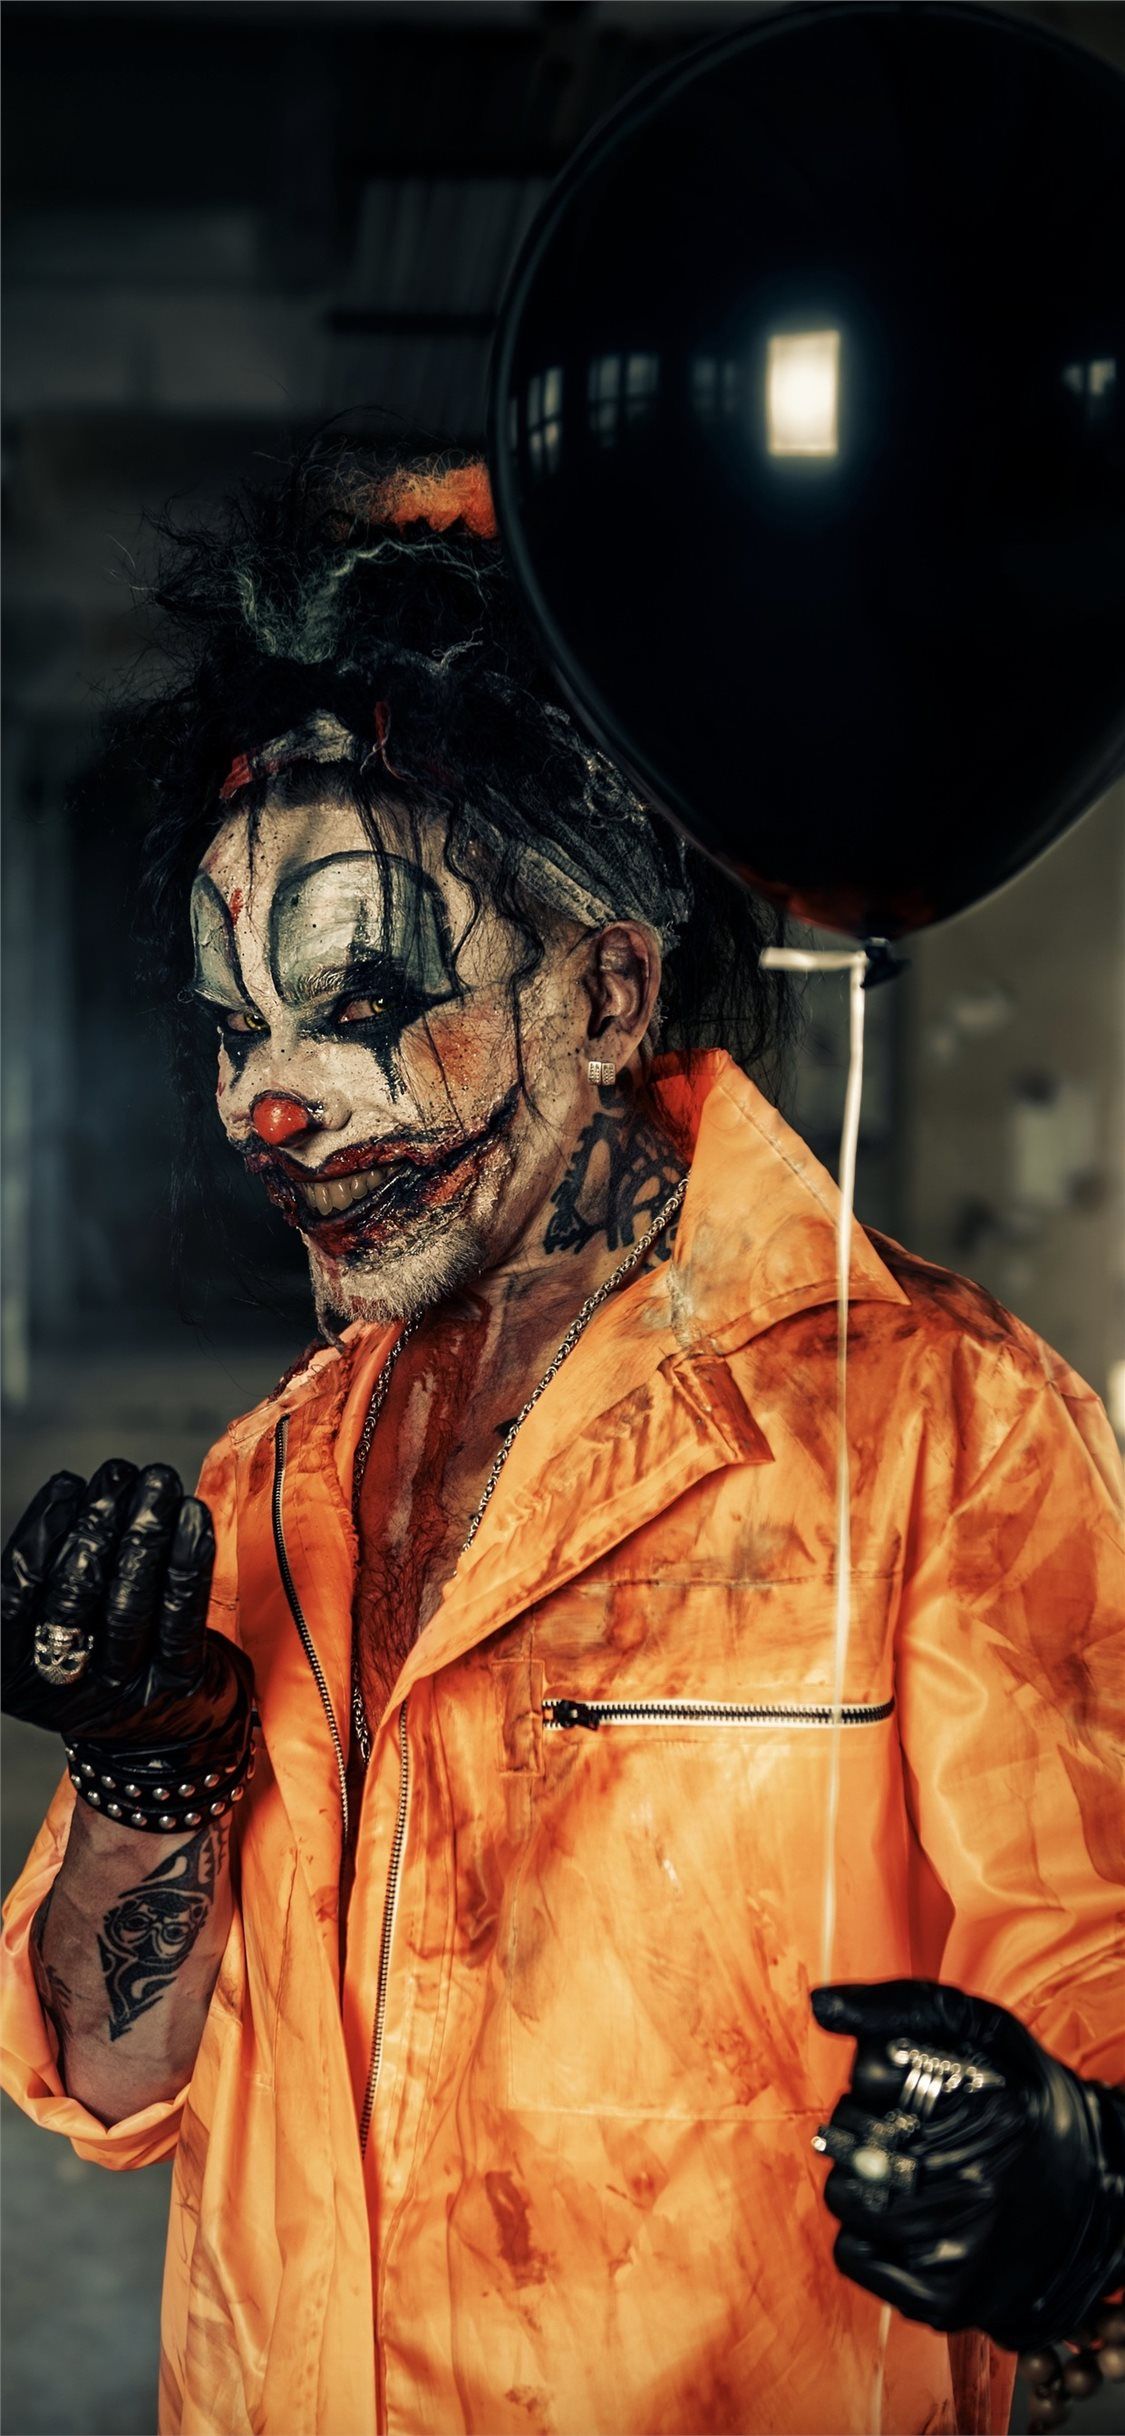 halloween guy with balloon 4k iPhone X Wallpaper Free Download